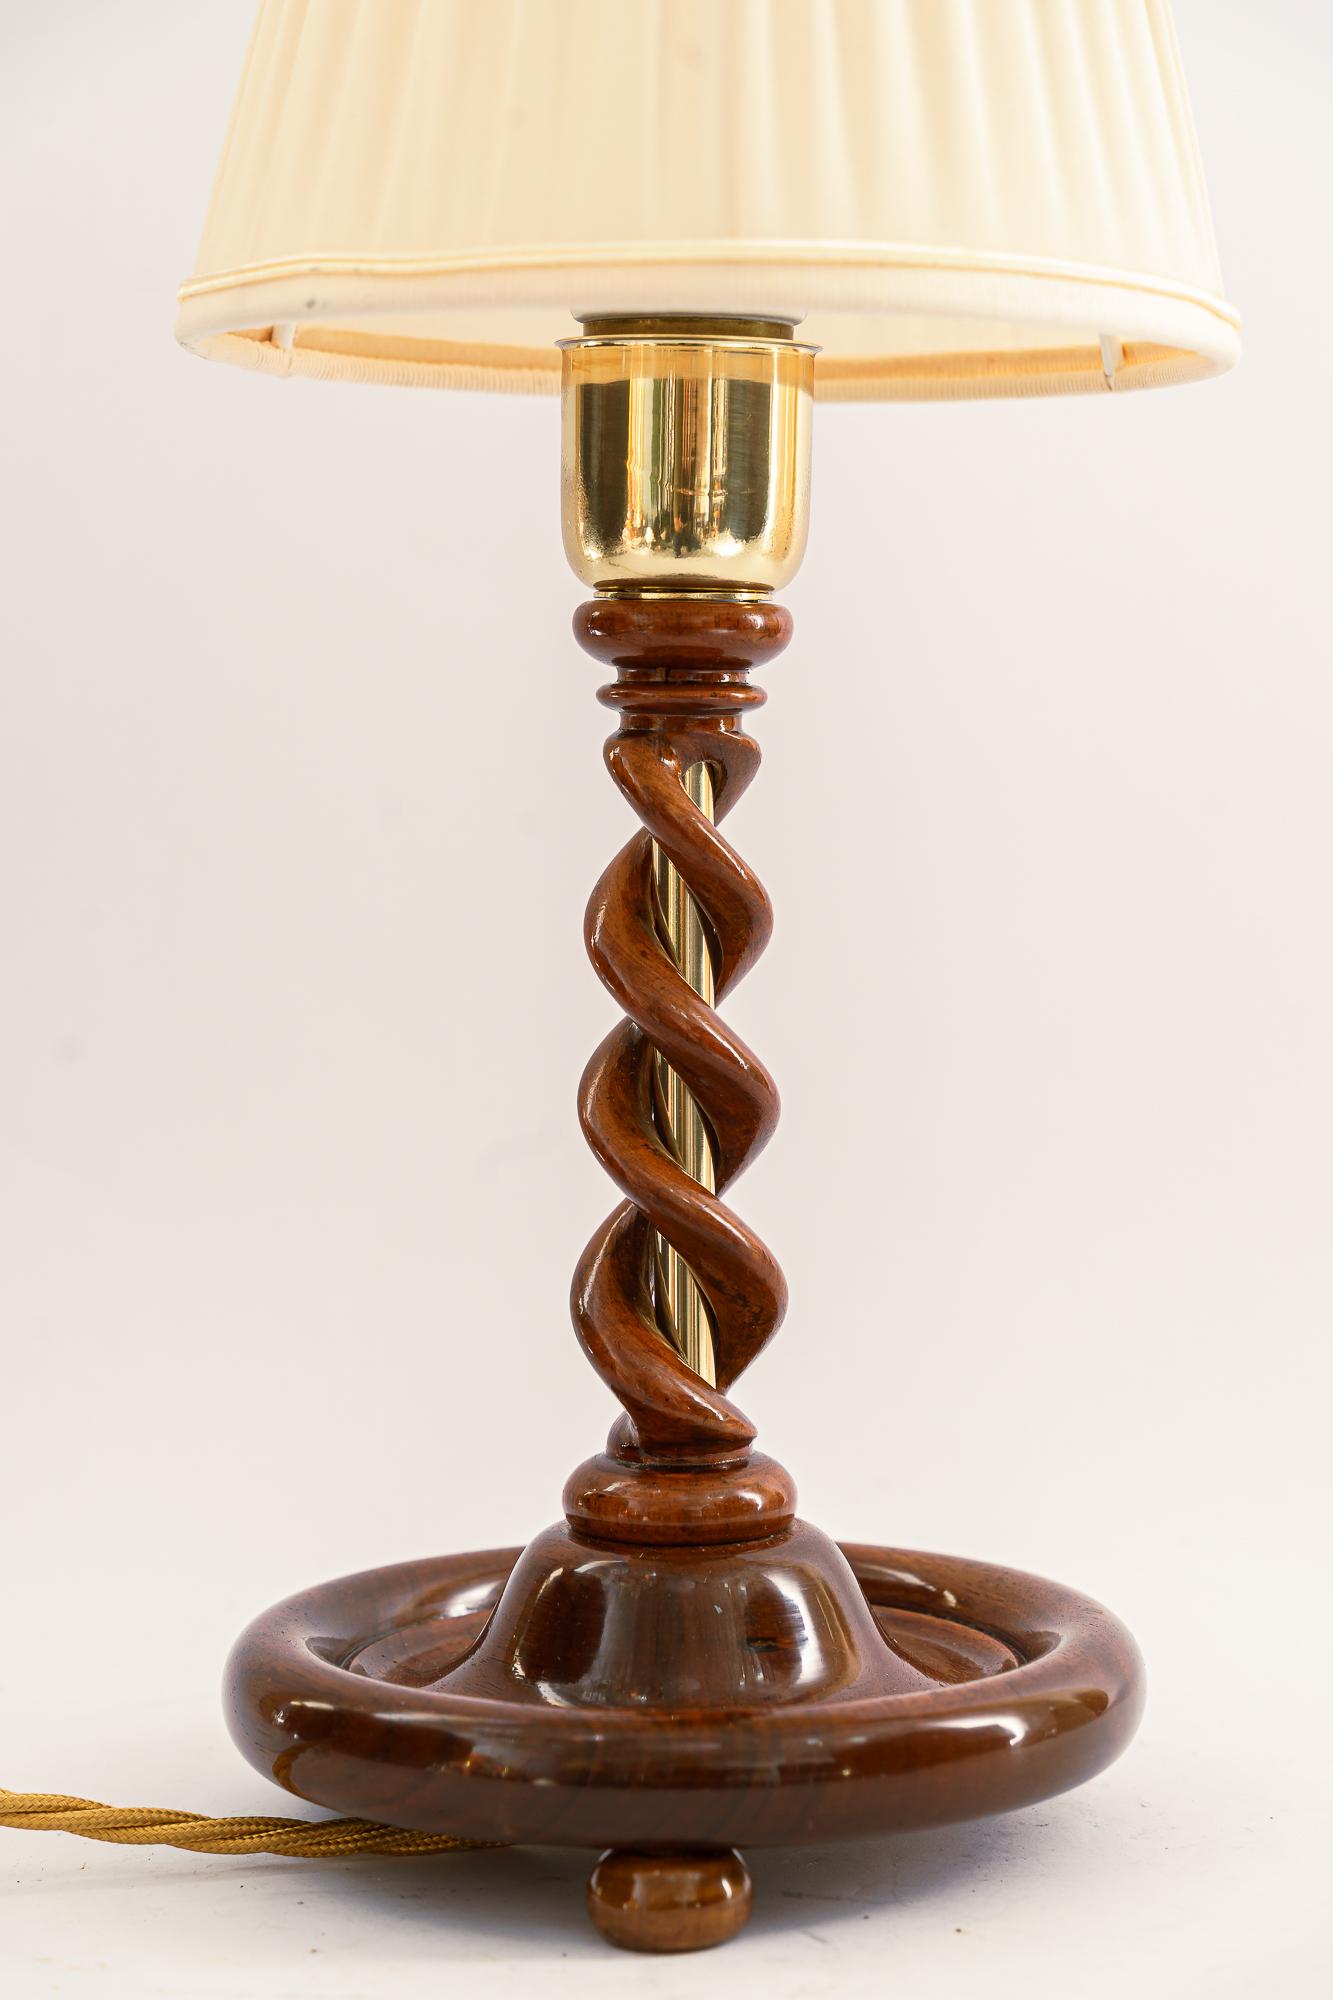 Art Deco wood lamp with fabric shade, Vienna, around 1920s.
Wood polished.
Brass polished and stove enameled
The fabric shade is replaced (new).